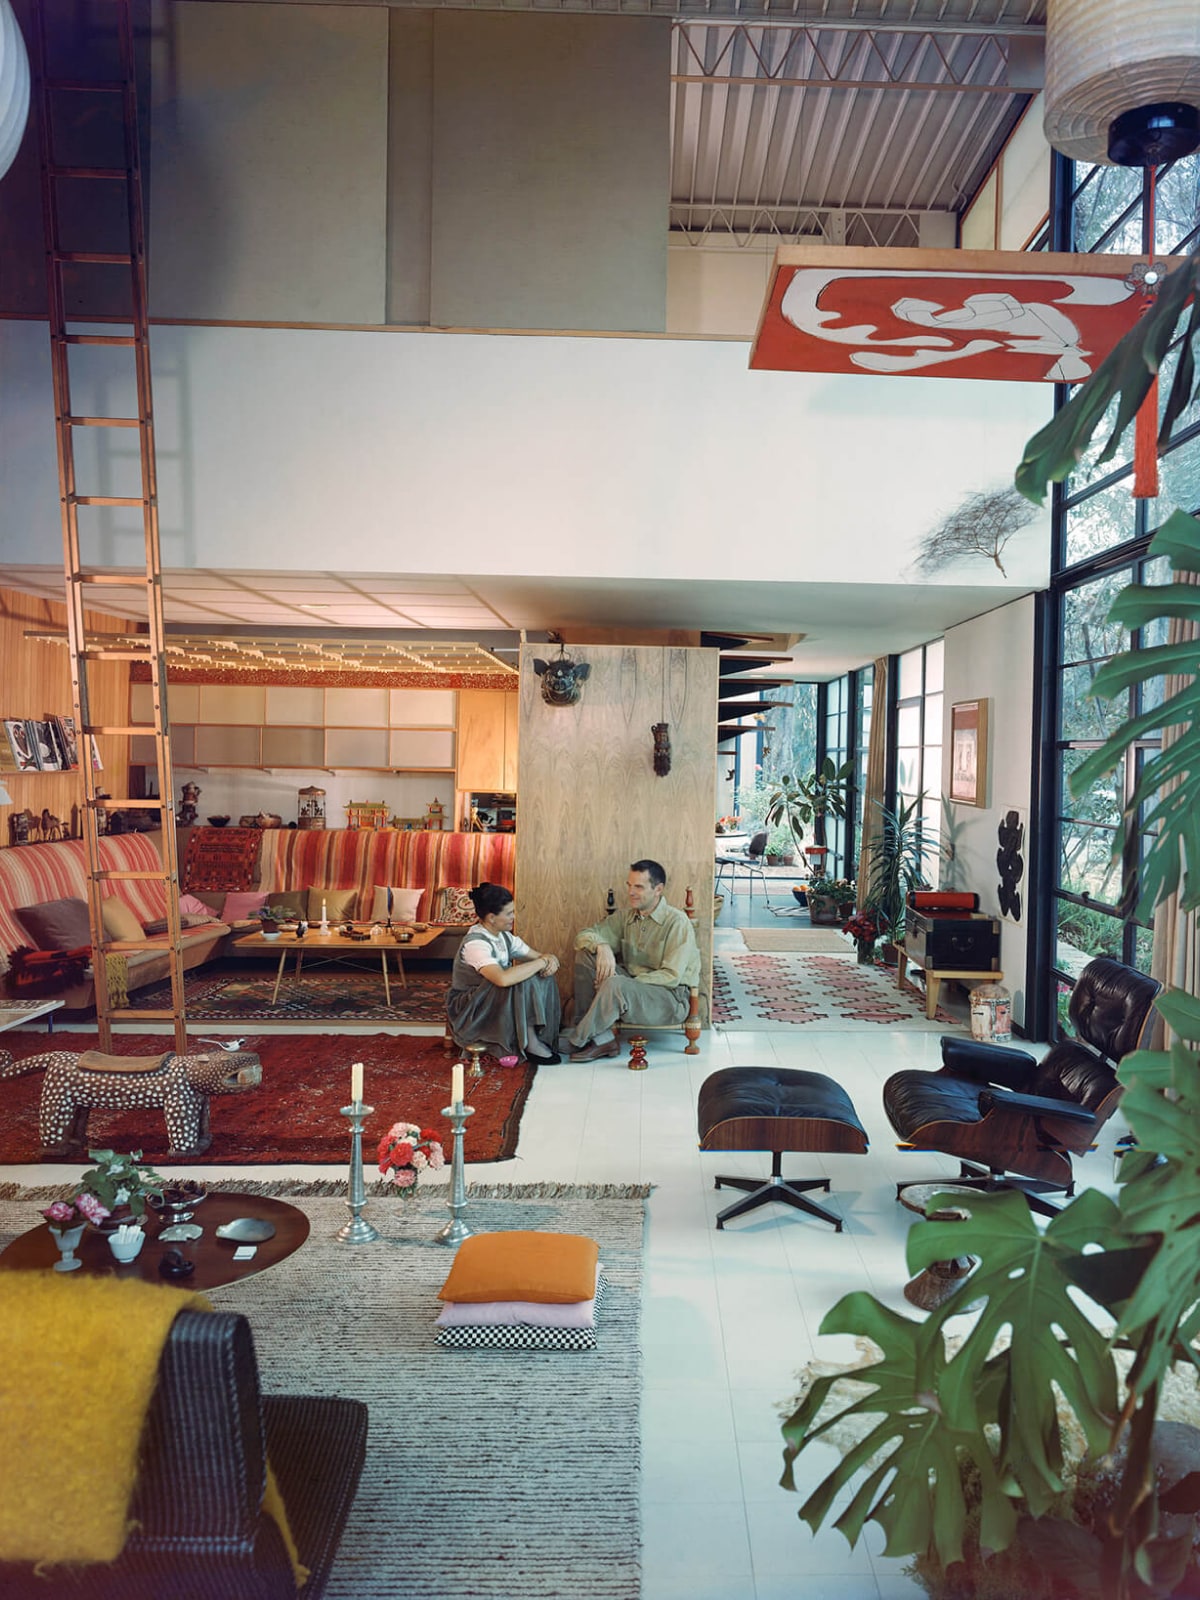 A colorful archival photo of Ray and Charles Eames sitting on the floor of their lofted ceiling living room, surrounded by candlesticks, objects collected from their travels, colorful pillows, and many of their pieces of furniture, including an Eames Lounge Chair and Ottoman in black leather.